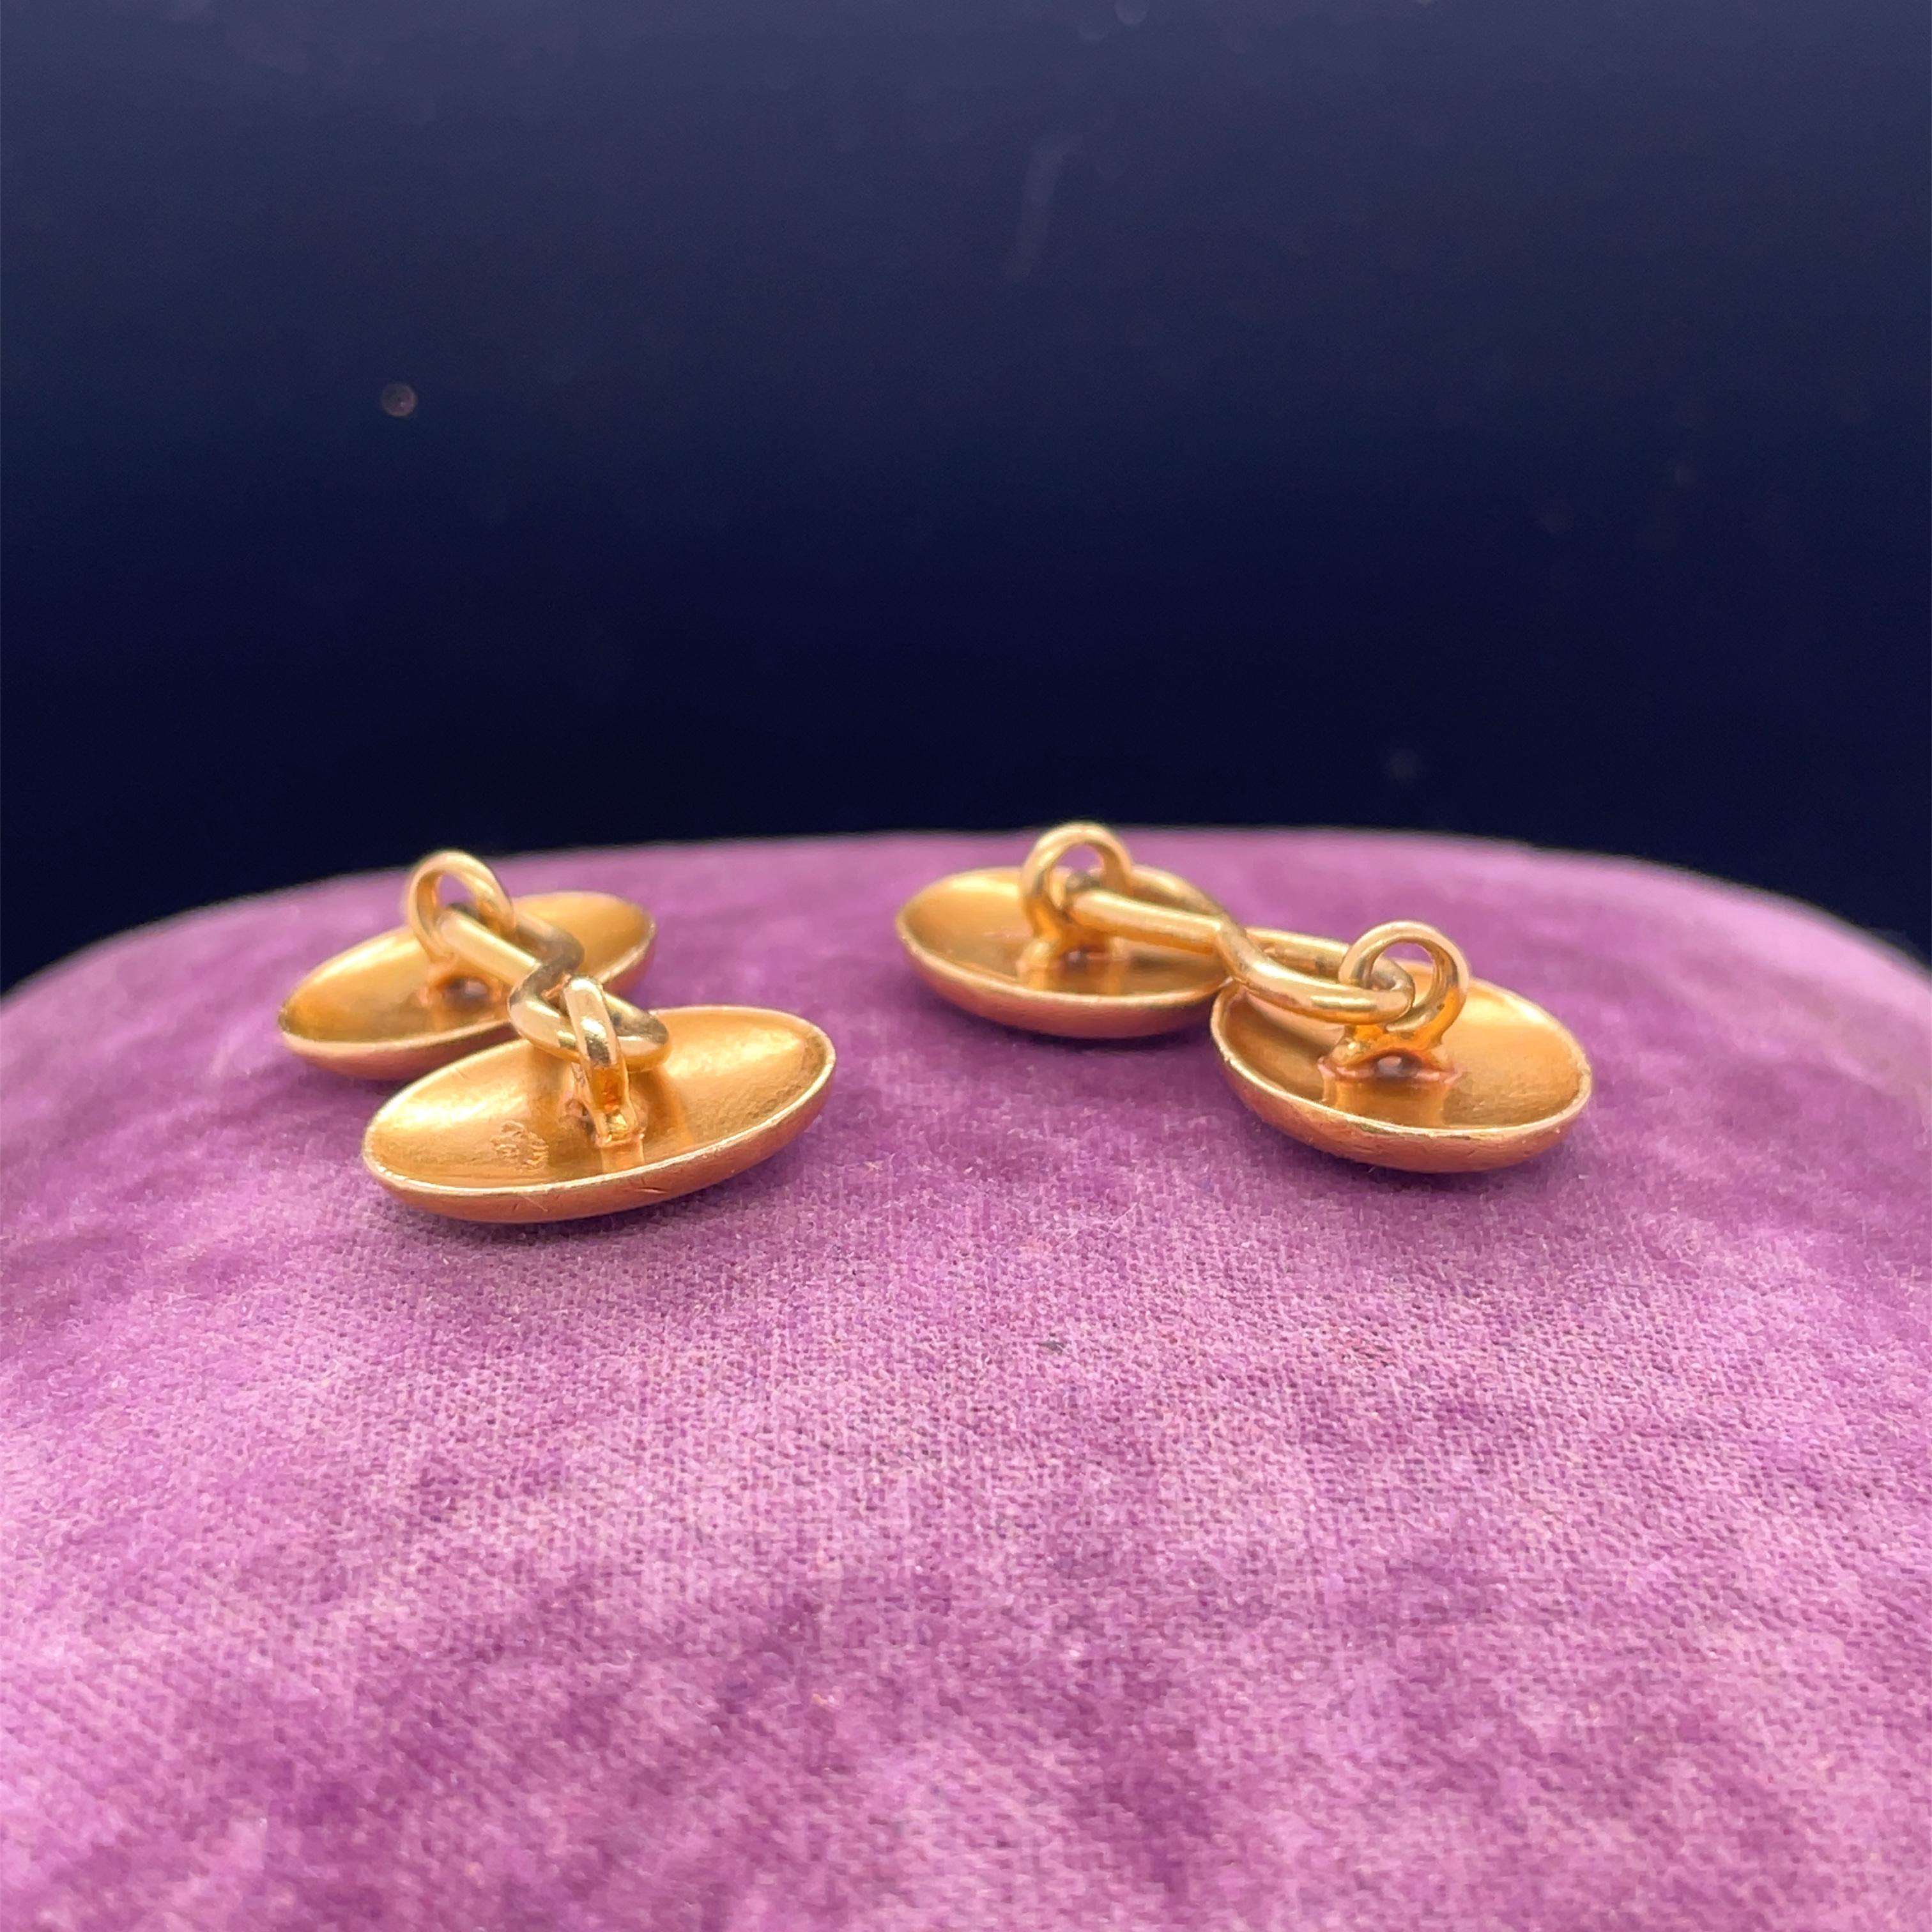 1910s 18K Yellow Gold Tiffany & Co. Monogram Cufflinks In Excellent Condition For Sale In Atlanta, GA